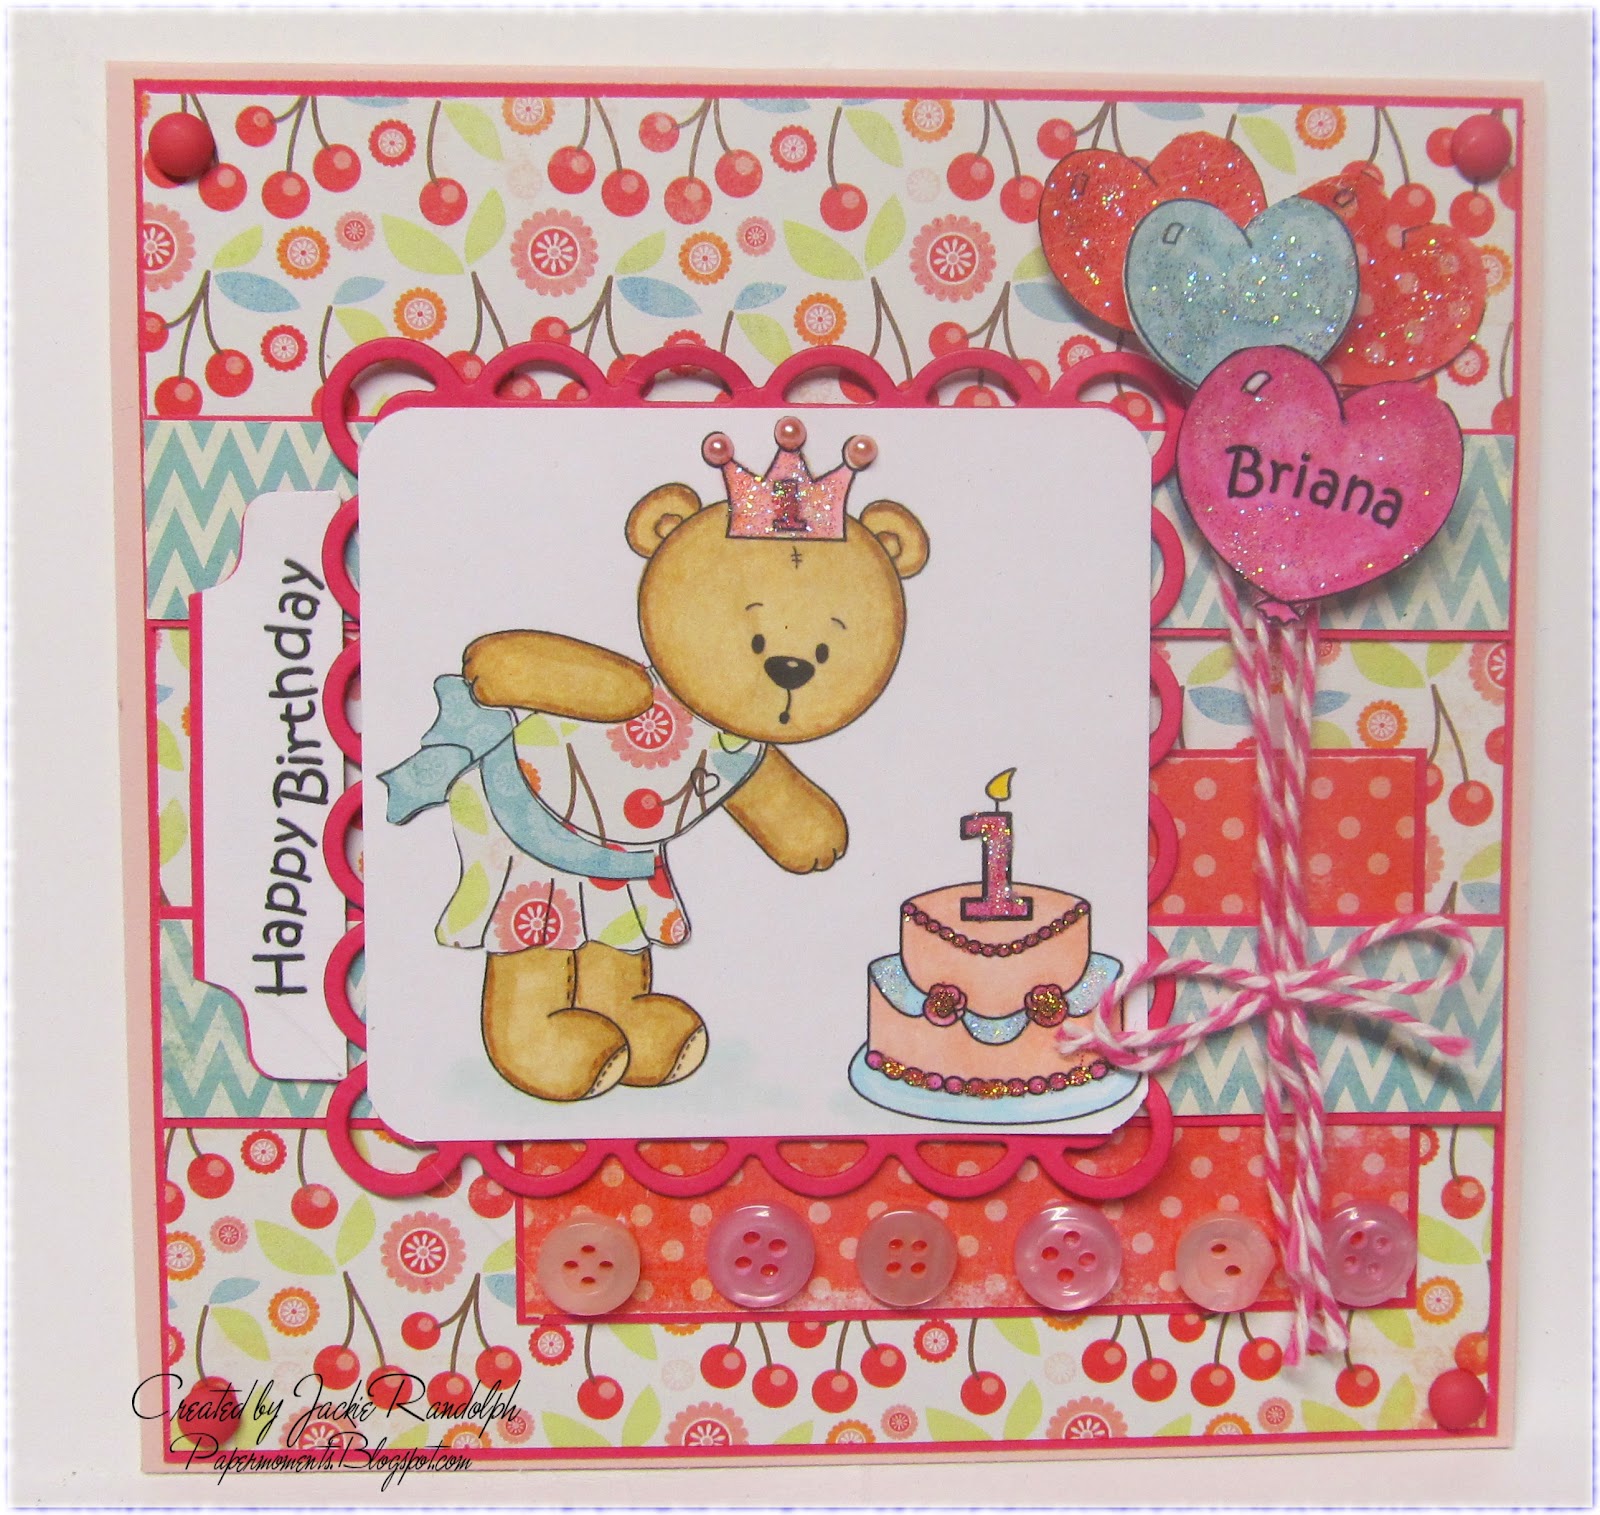 Paper Moments: Whimsy Stamps March Digital Release Blog Hop!